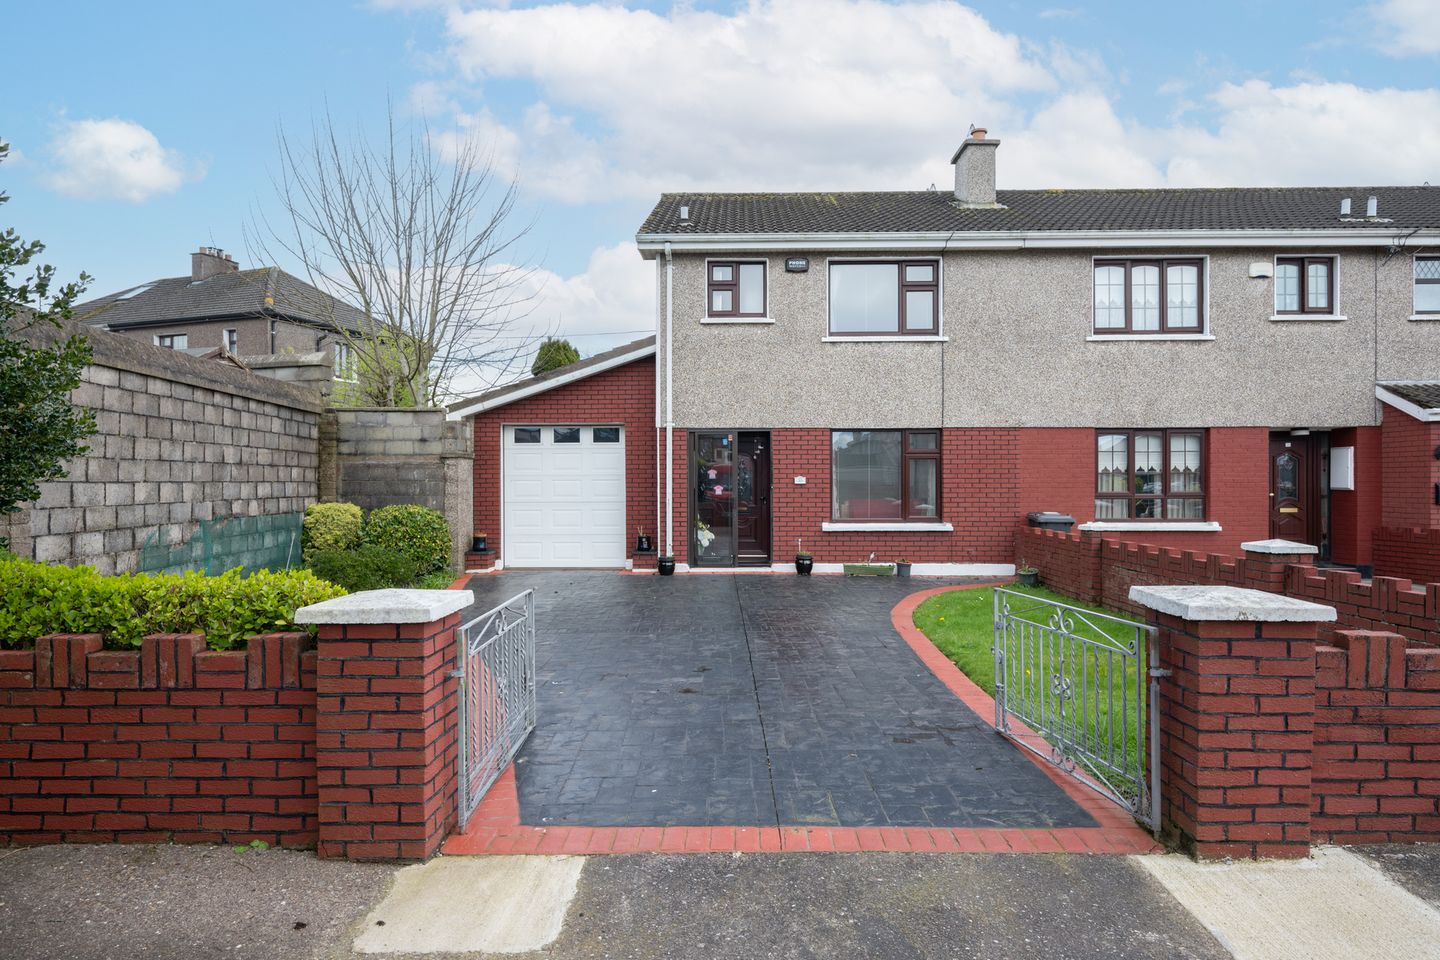 35 Woodlawn, Tramore Road, Togher (Cork City), Co. Cork, T12X2P5